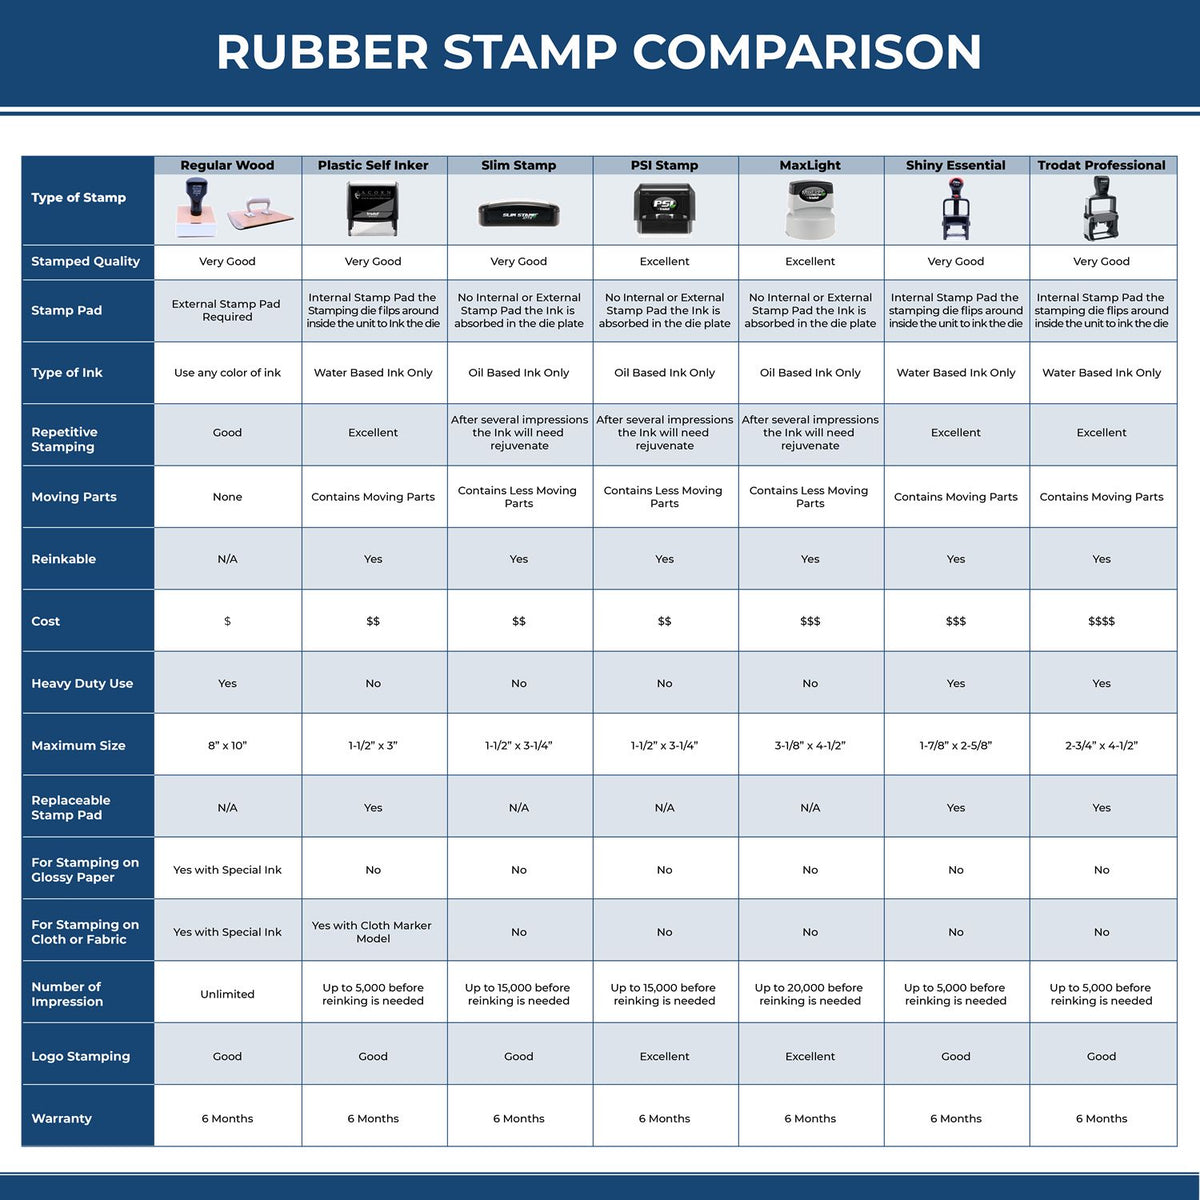 A comparison chart for the different types of mount models available for the Self-Inking Maryland Landscape Architect Stamp.